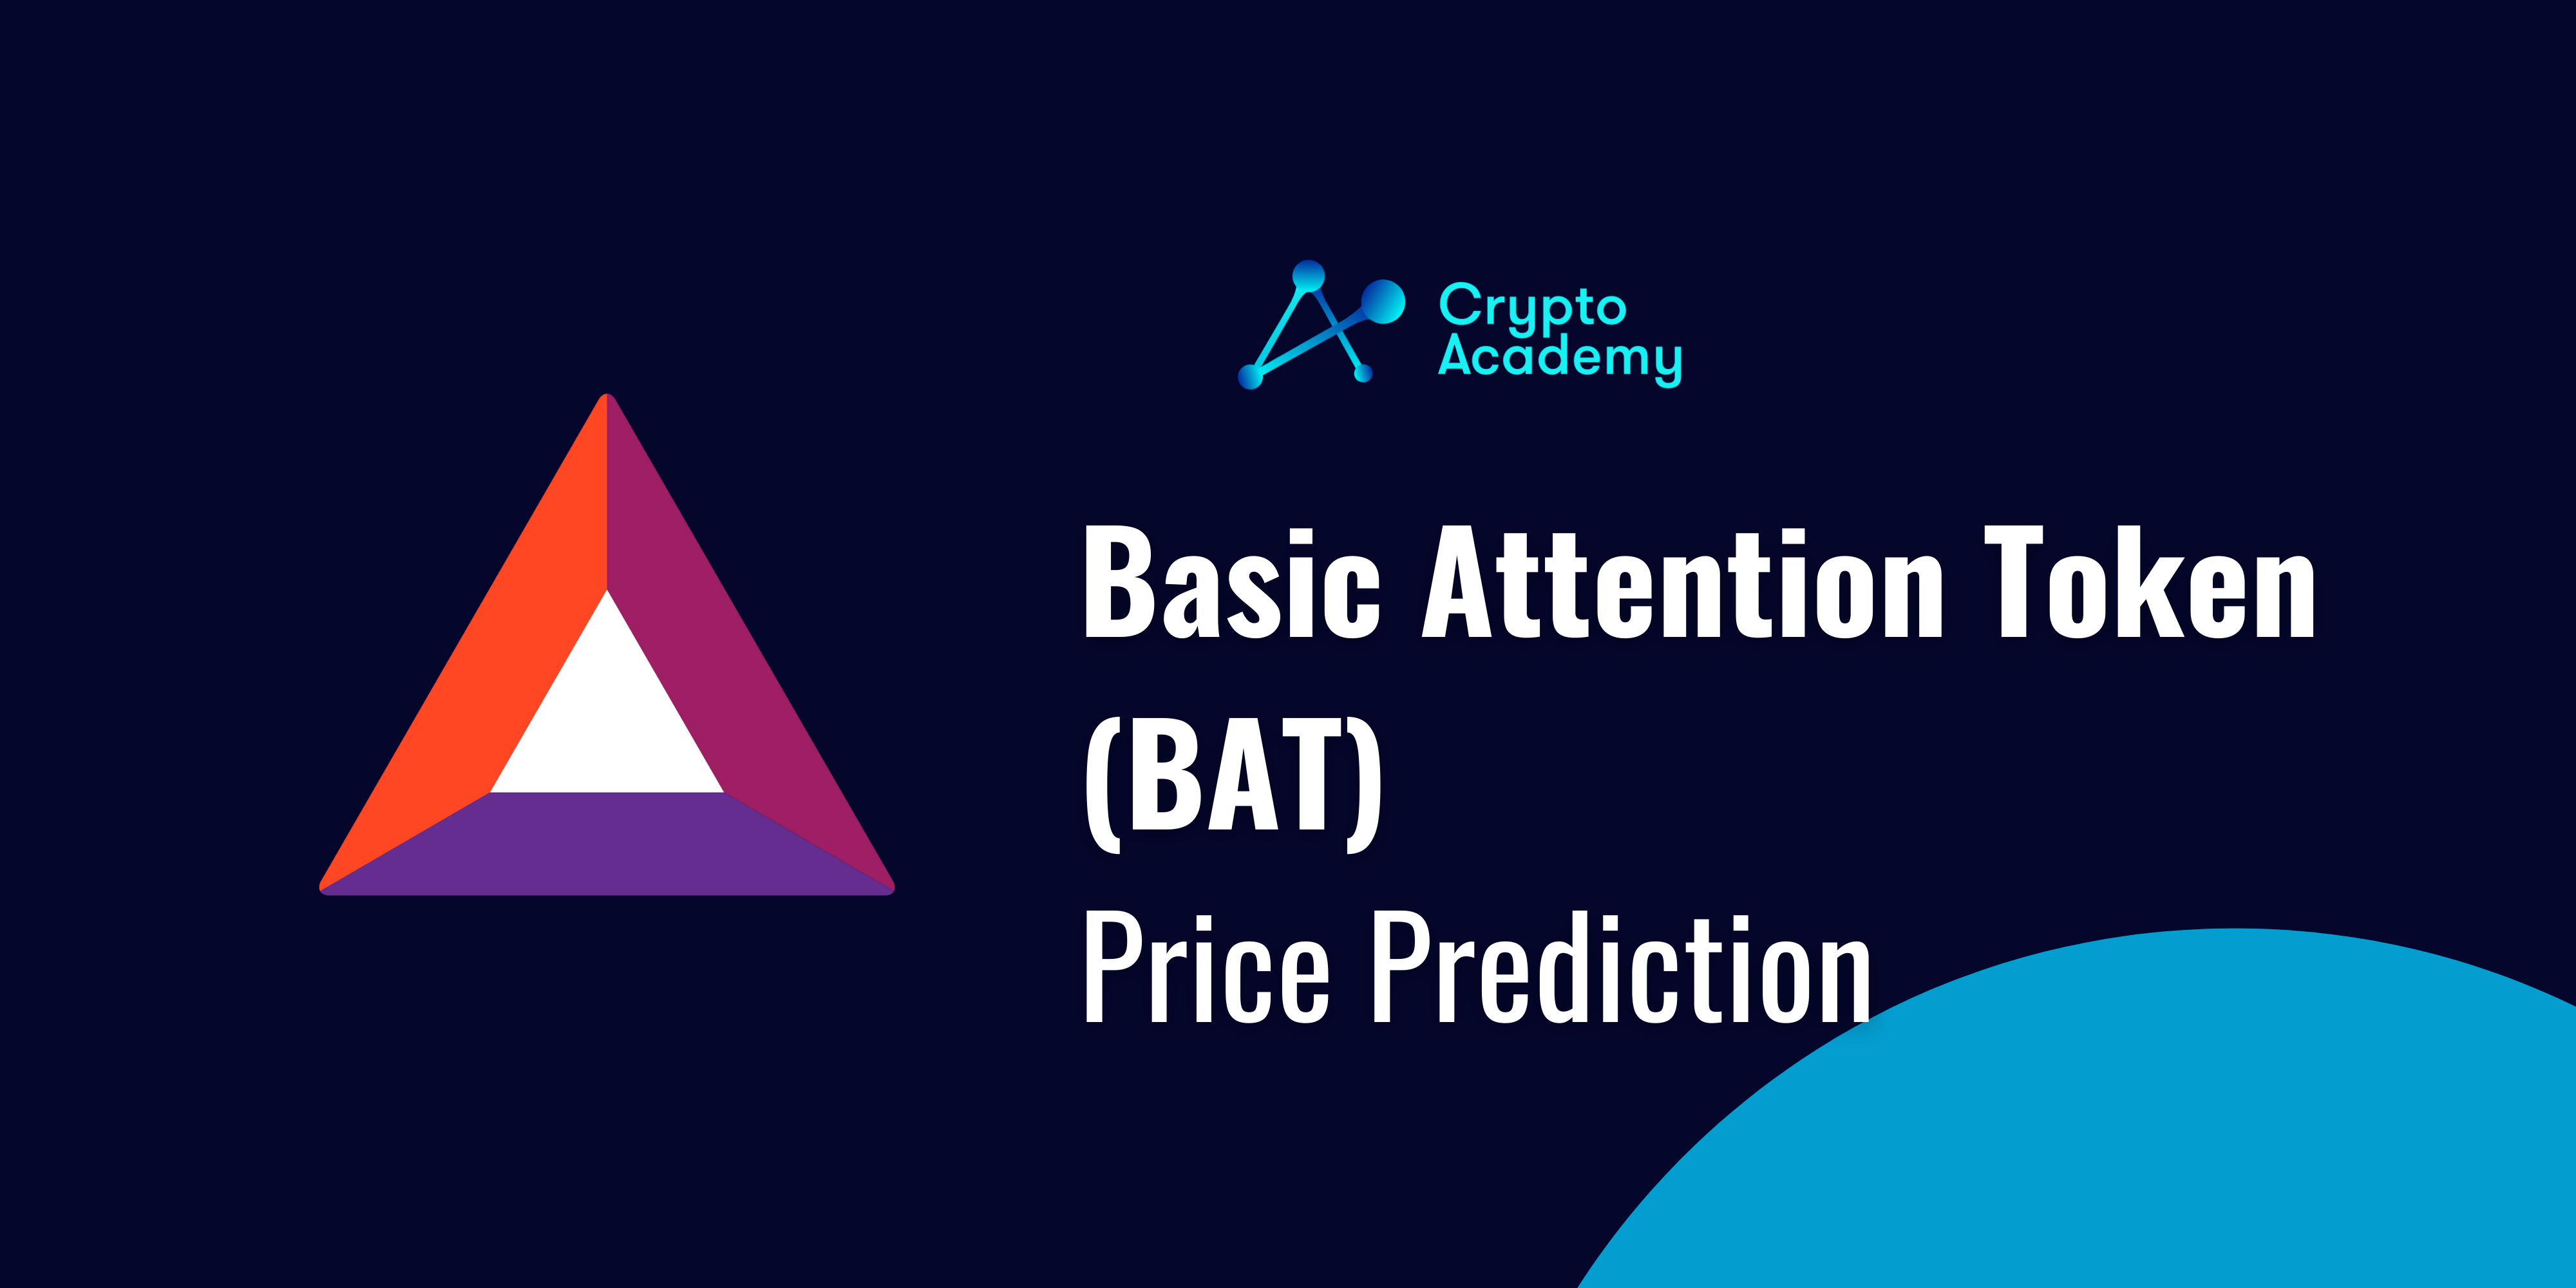 Basic Attention Token (BAT) Price Prediction 2021 and Beyond - Is BAT a Good Investment?